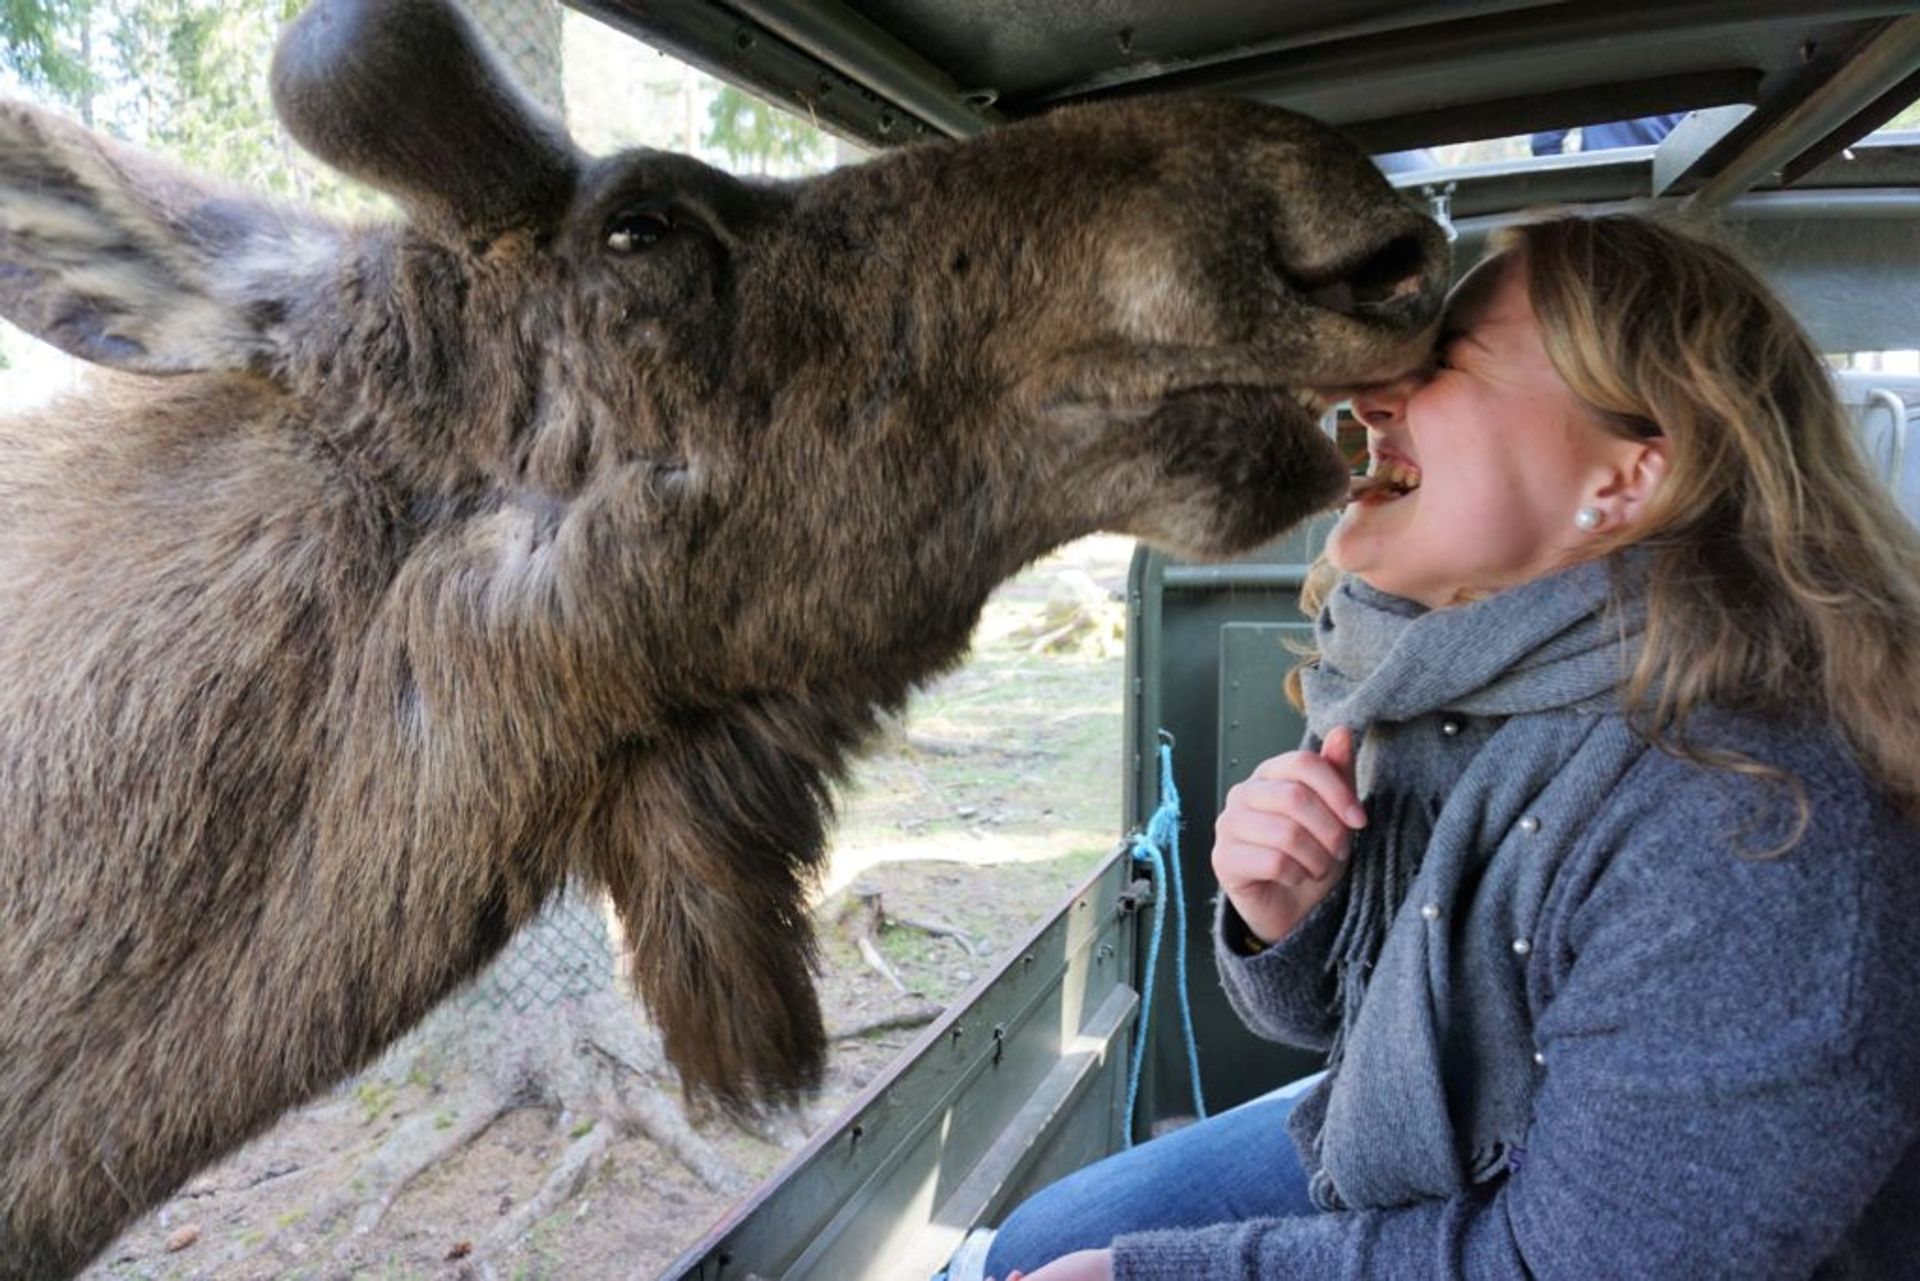 A moose close to a woman's face.